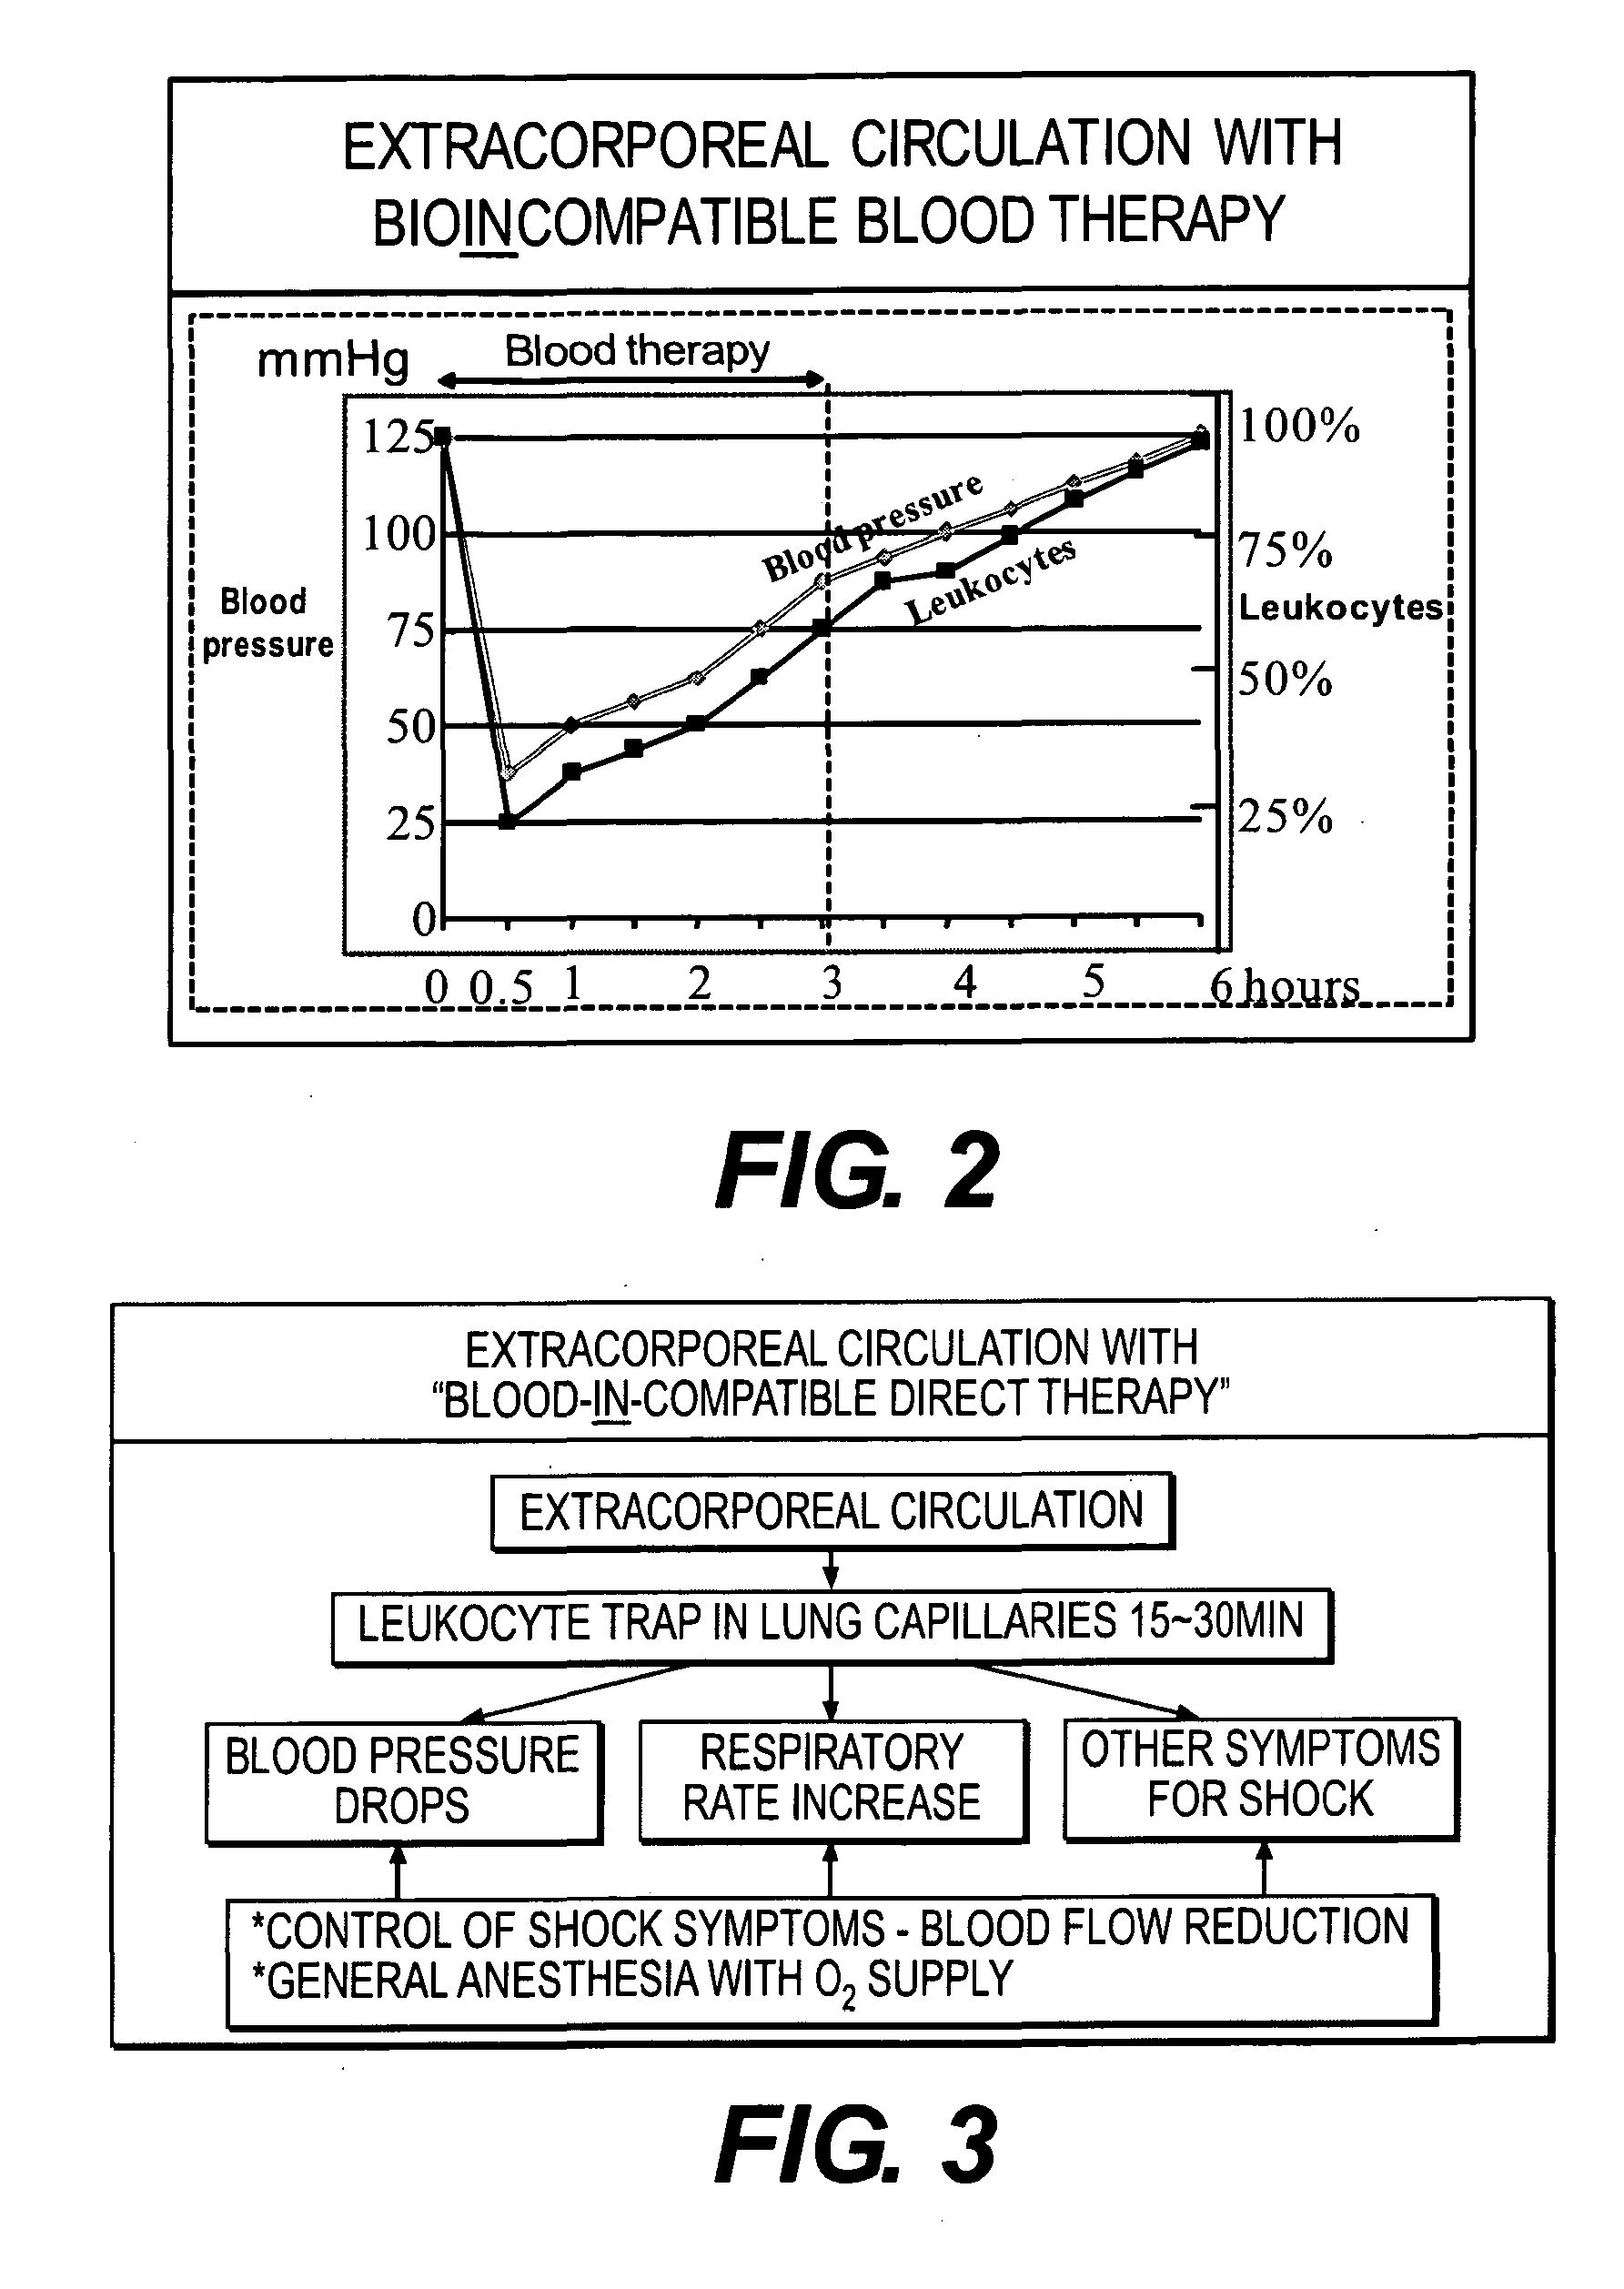 Immunoactivation blood perfusion filter for the treatment of malignant tumors